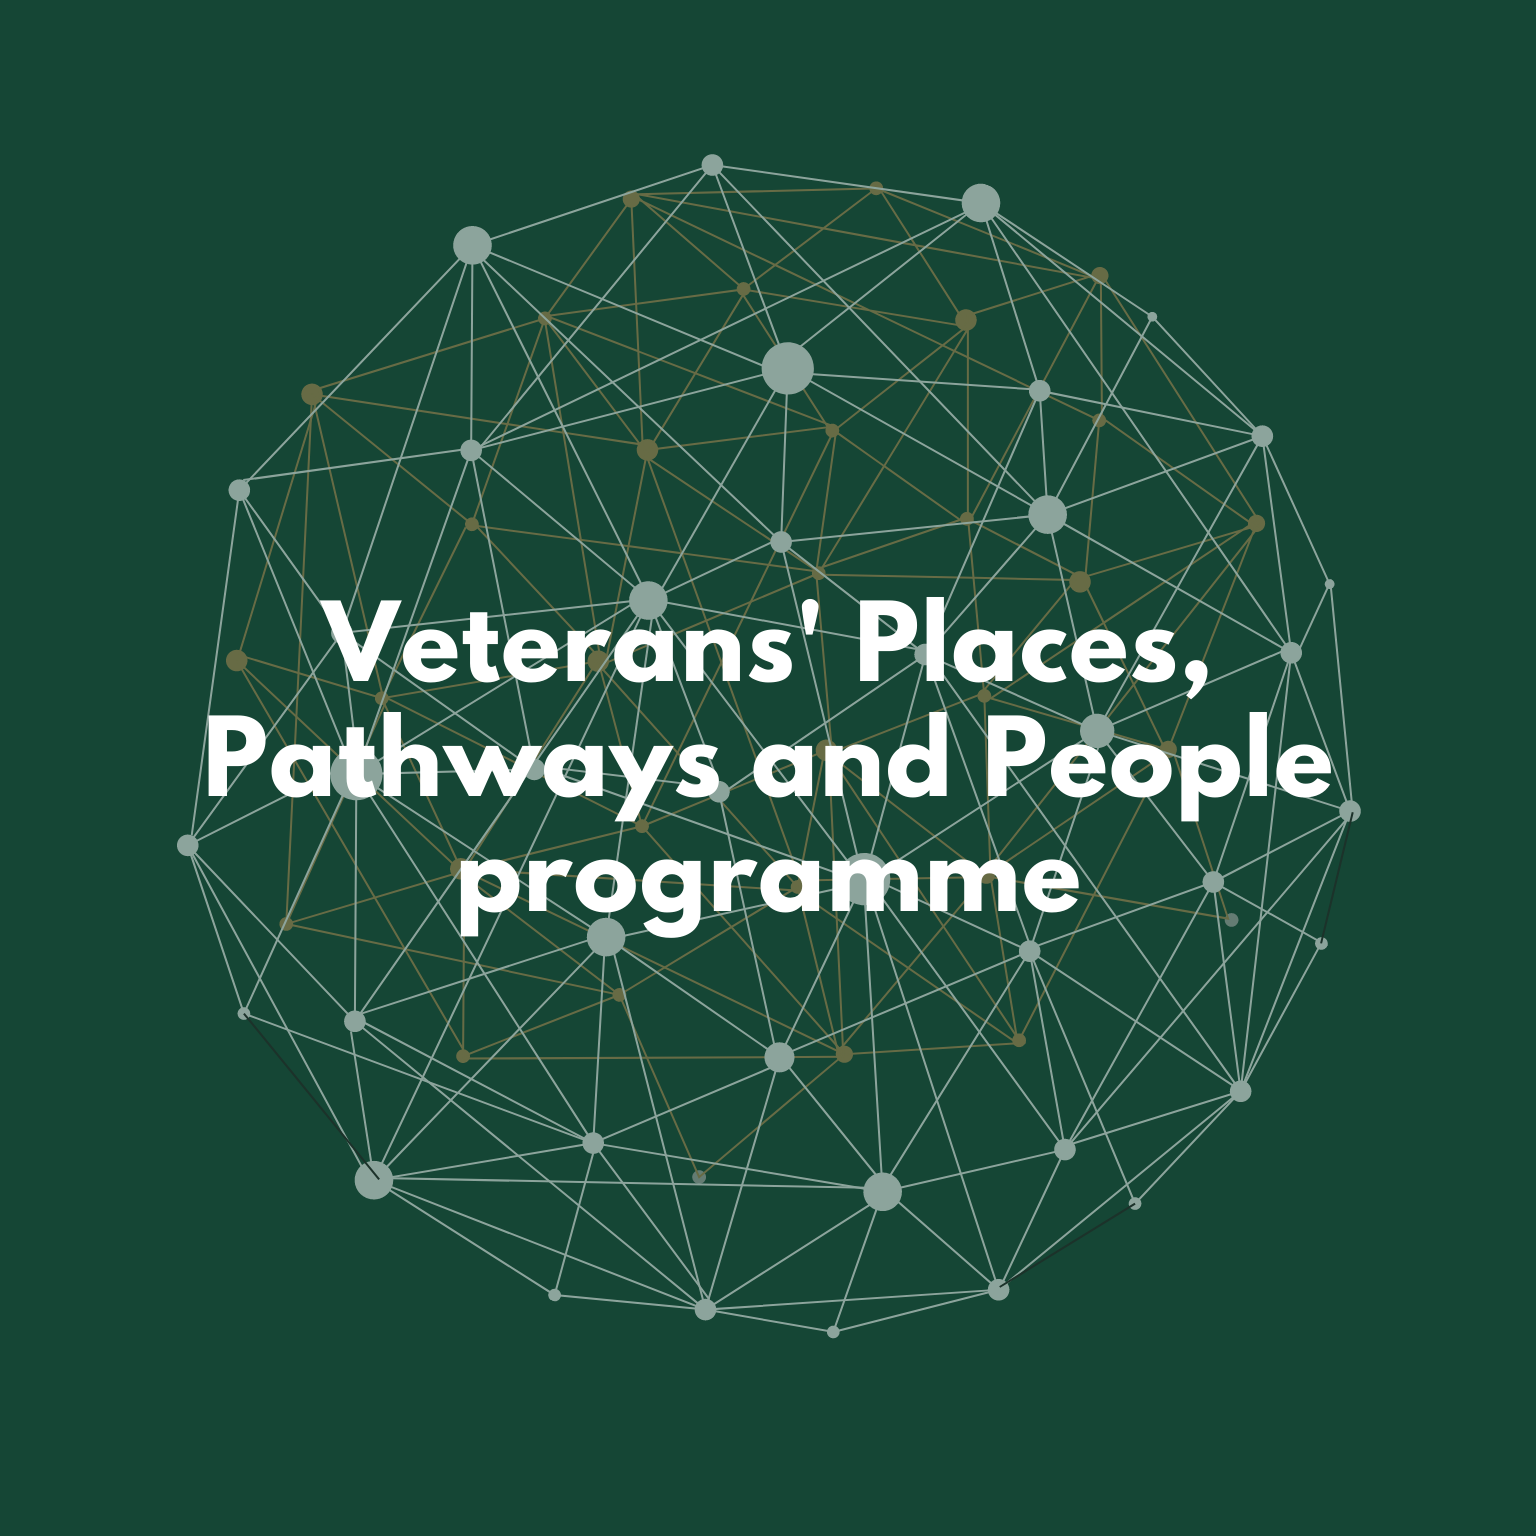 Veterans' Places Pathways and People Programme